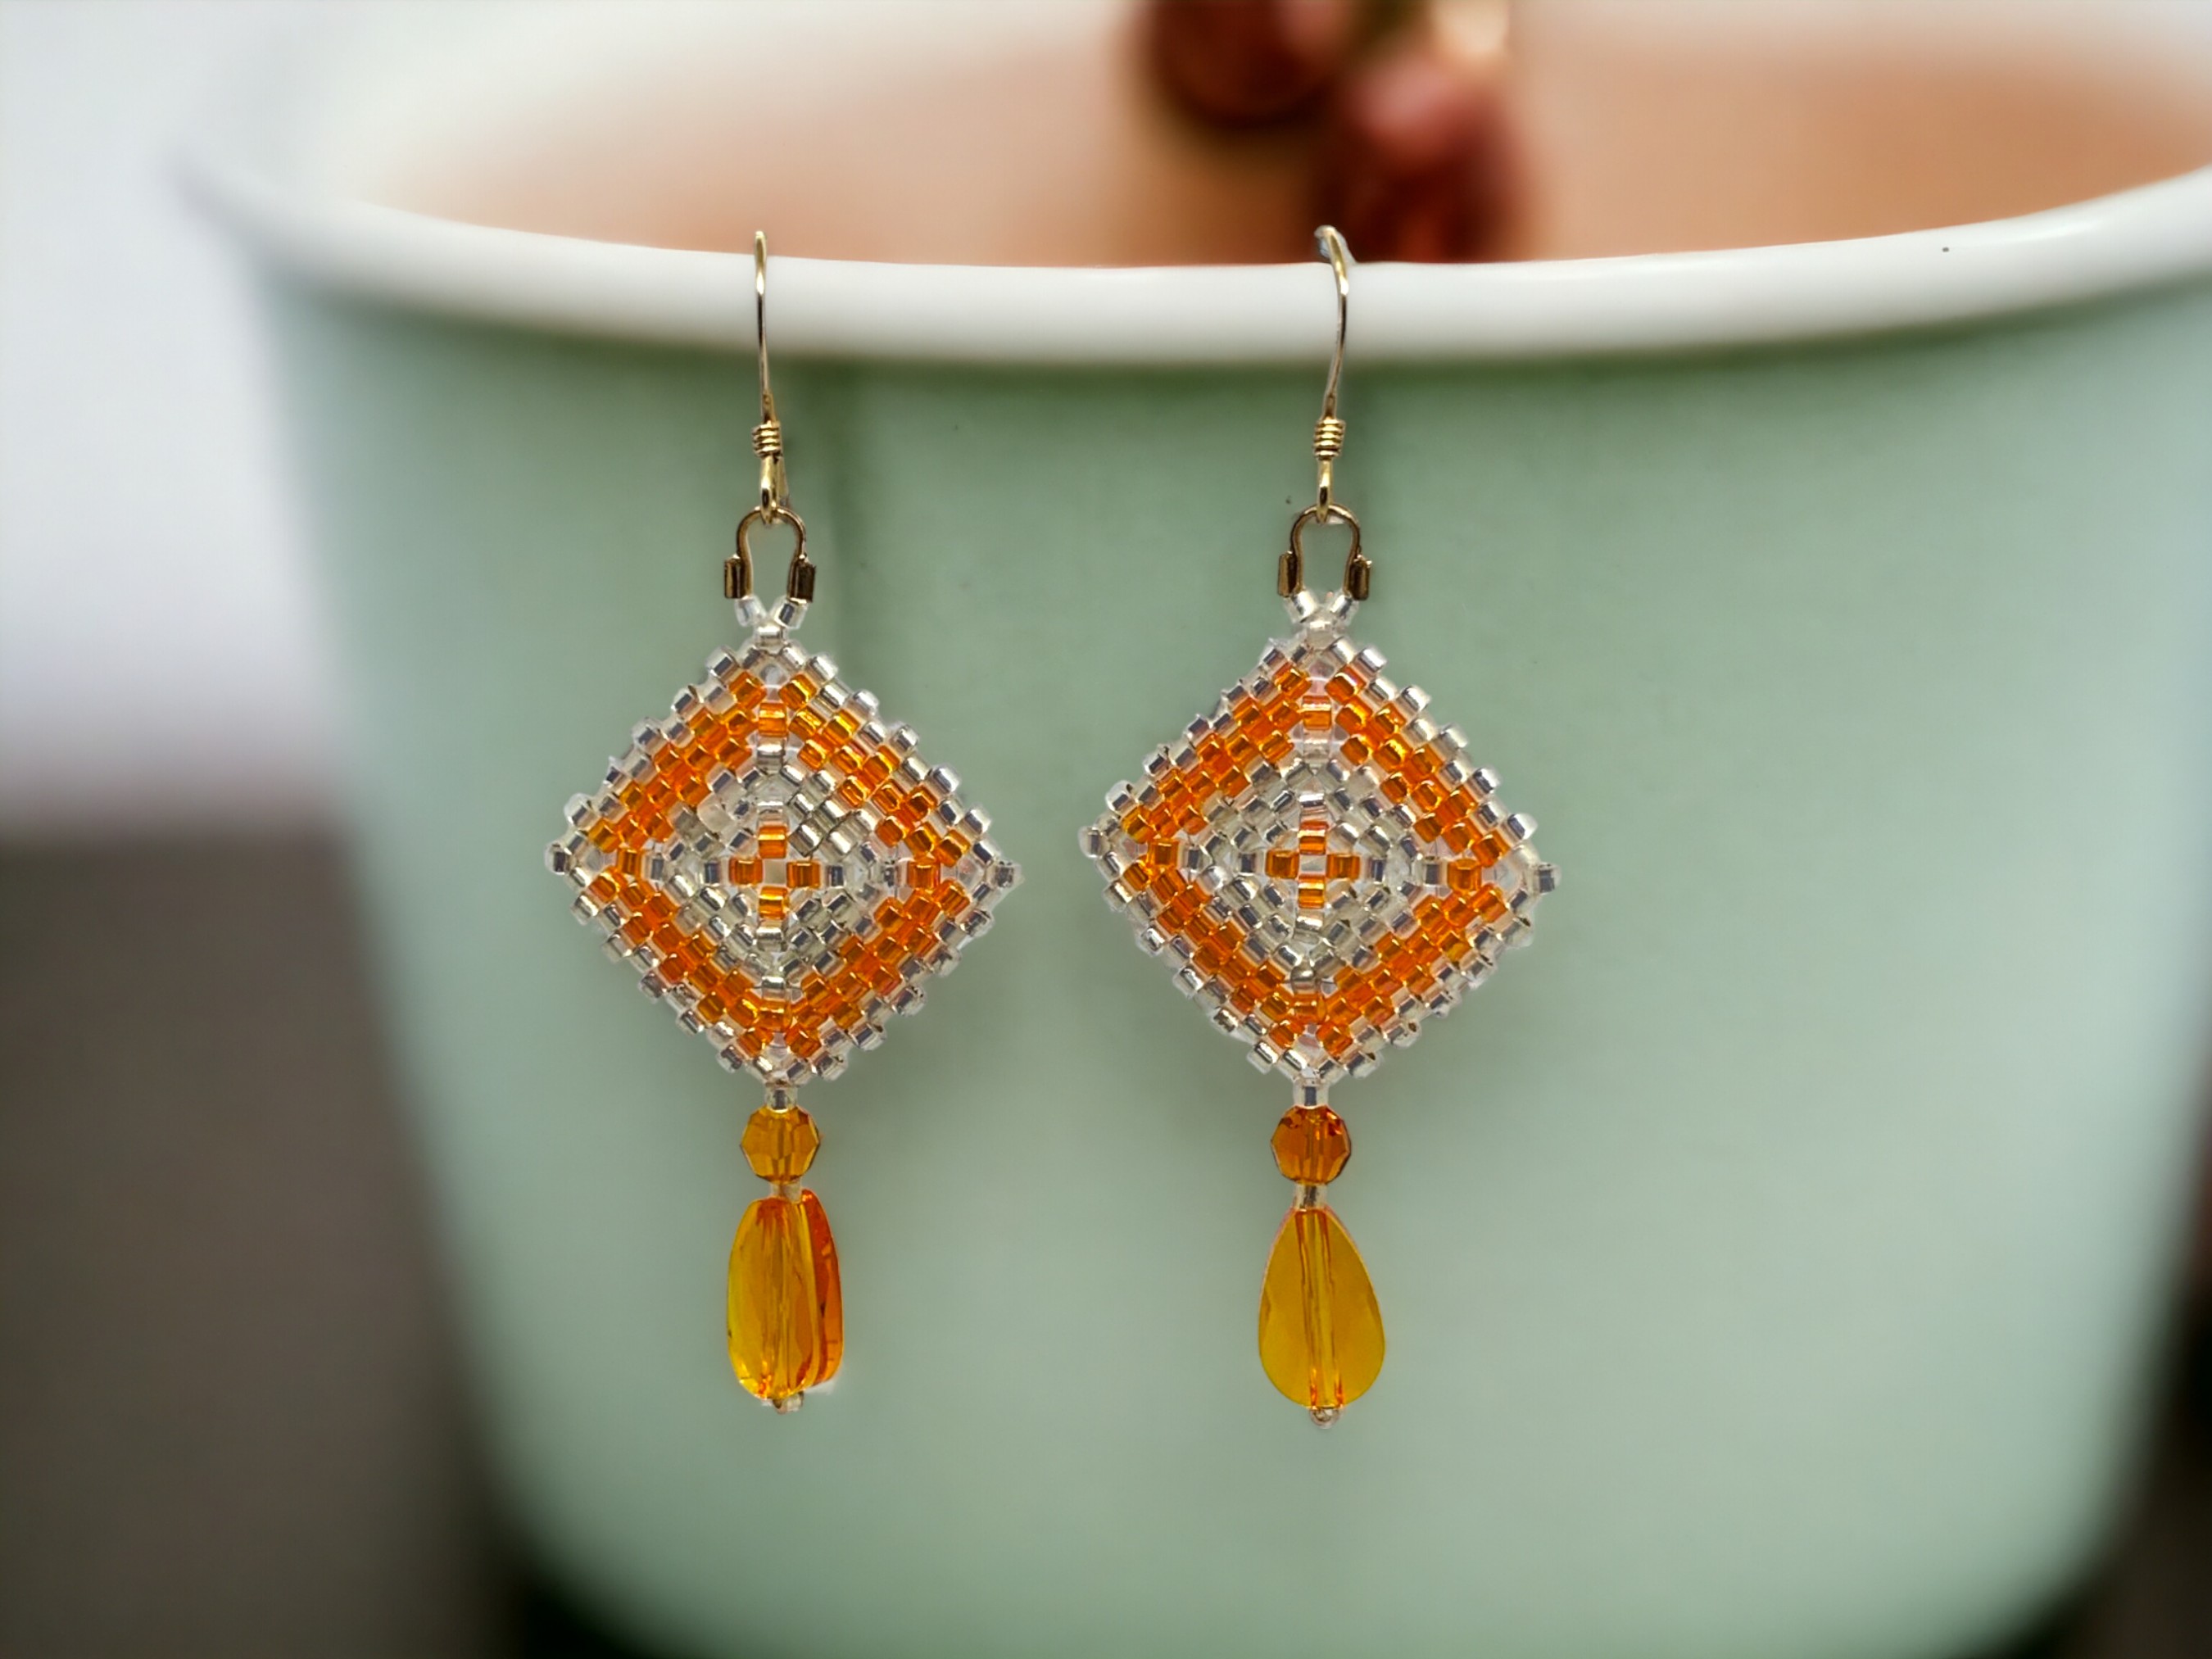 Classic Square-Shaped Beadwork Earrings, Peyote Stitch Earrings with Crystal Accents